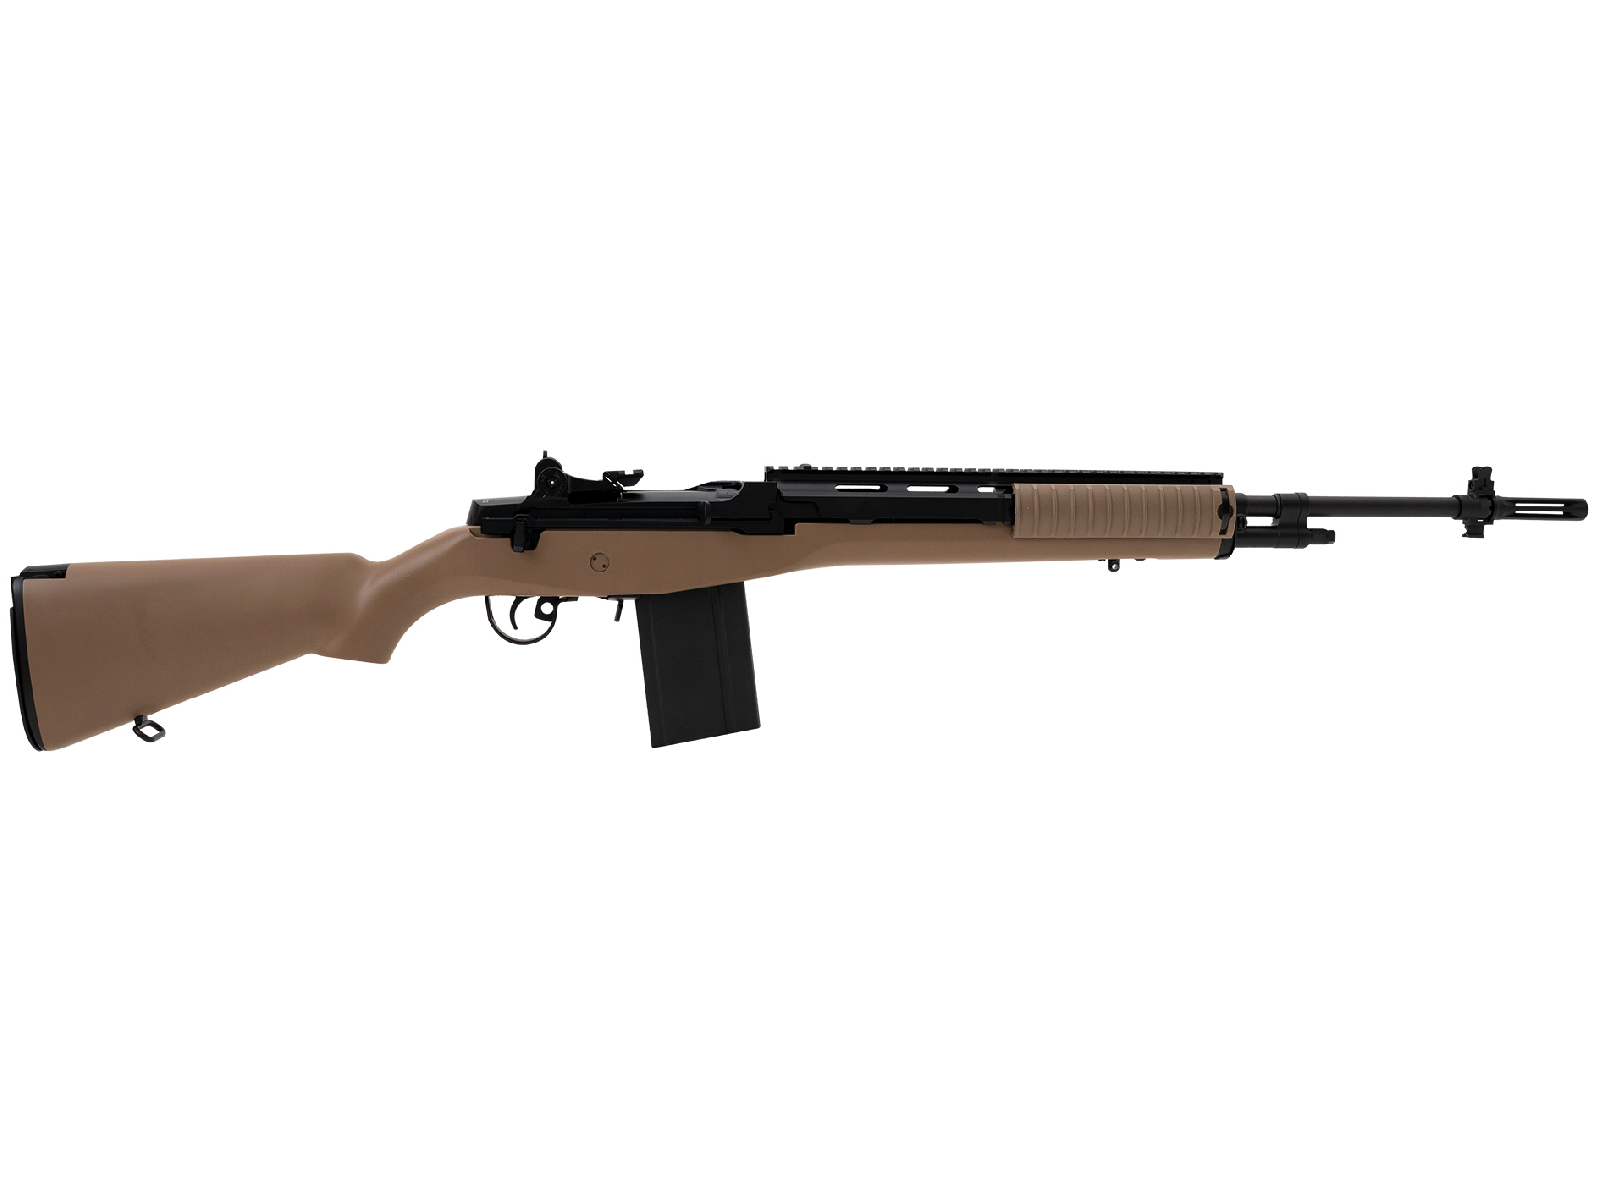 Matrix Field Ops Series M14 DMR Airsoft AEG Package by CYMA (Color: Tan)